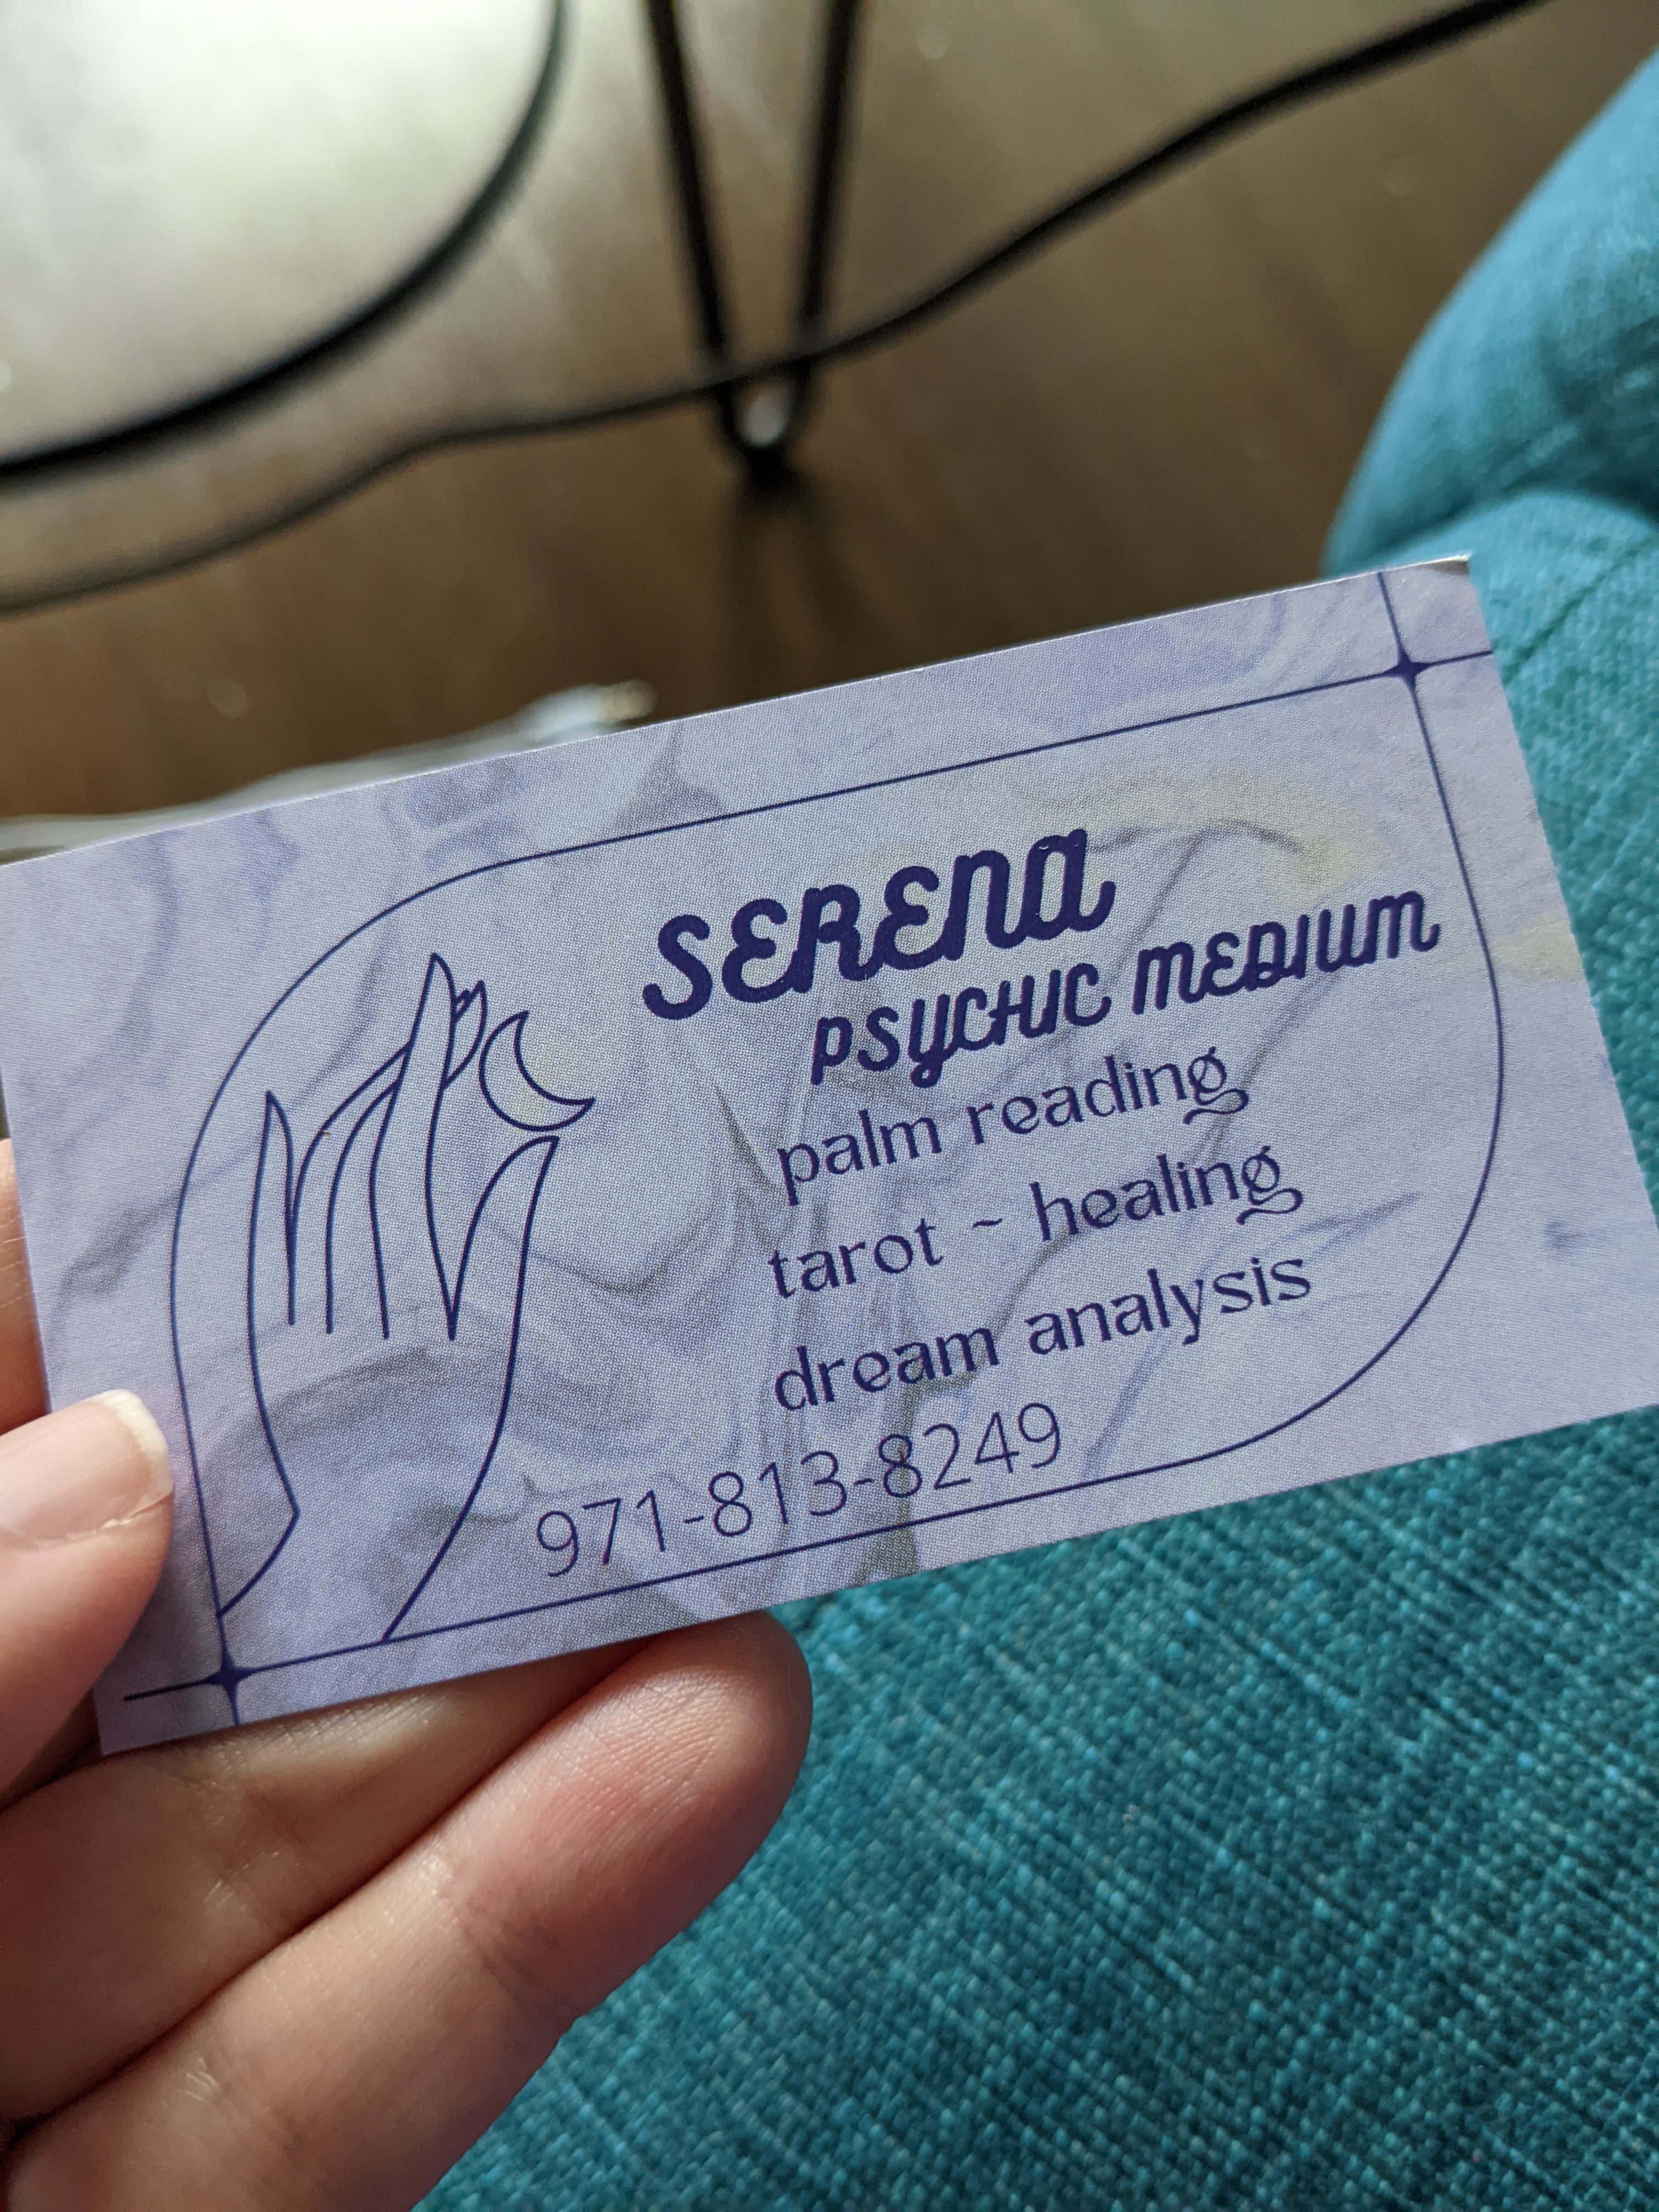 a psychic's business card